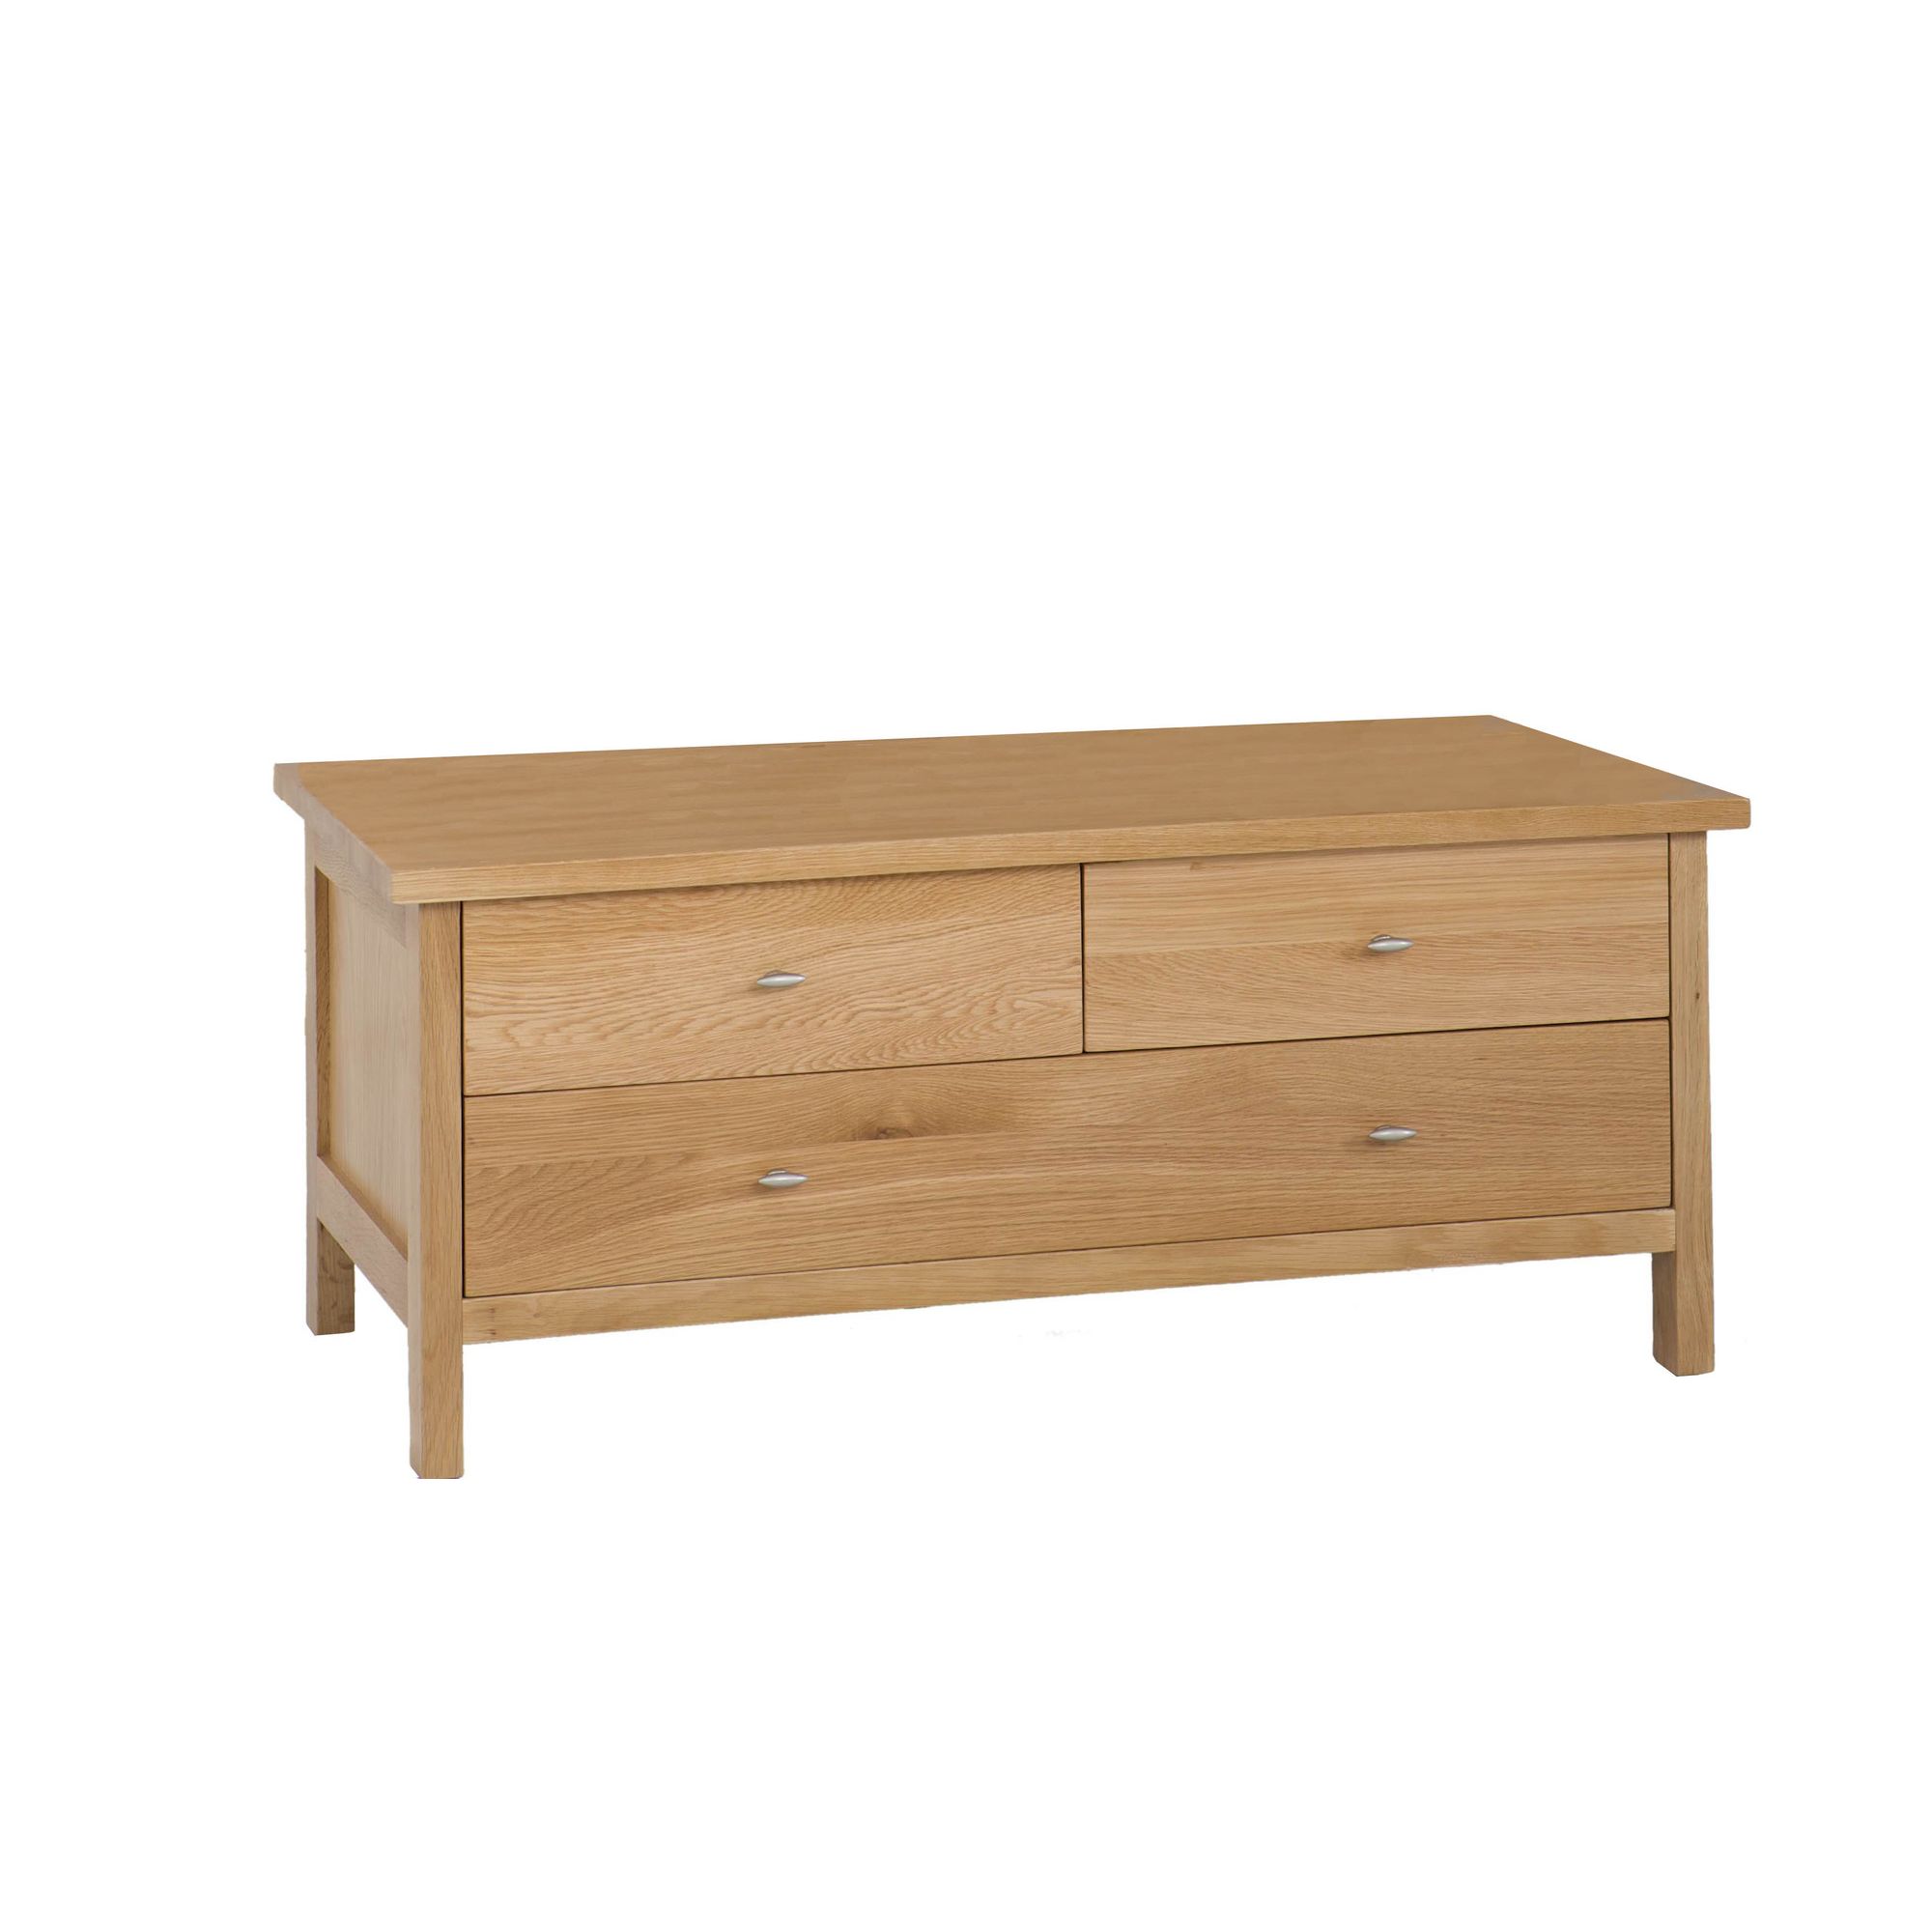 Oakinsen Barry Coffee Table at Tesco Direct